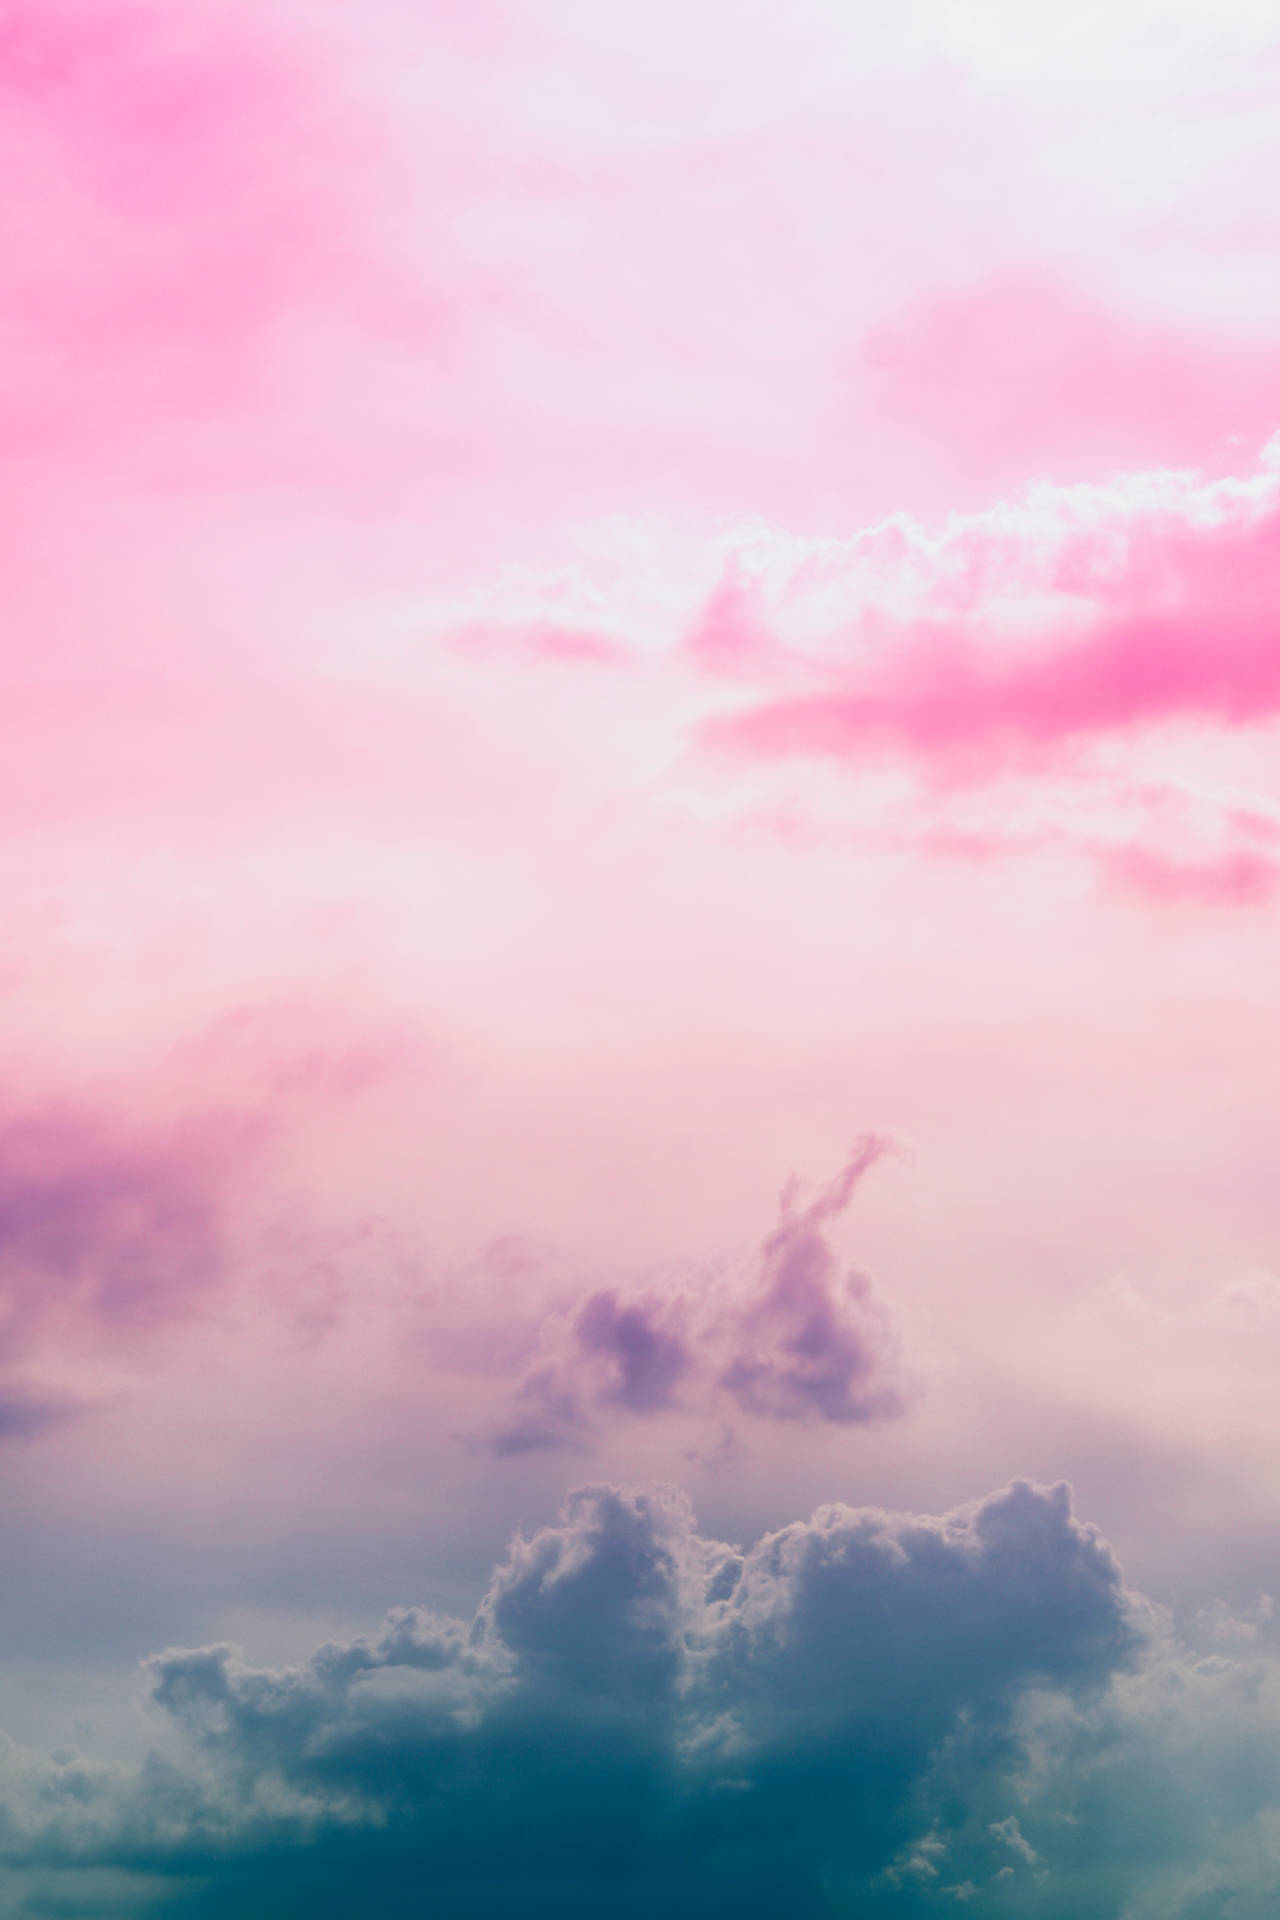 Aesthetic Sky Of Pink And Teal Gradient Background